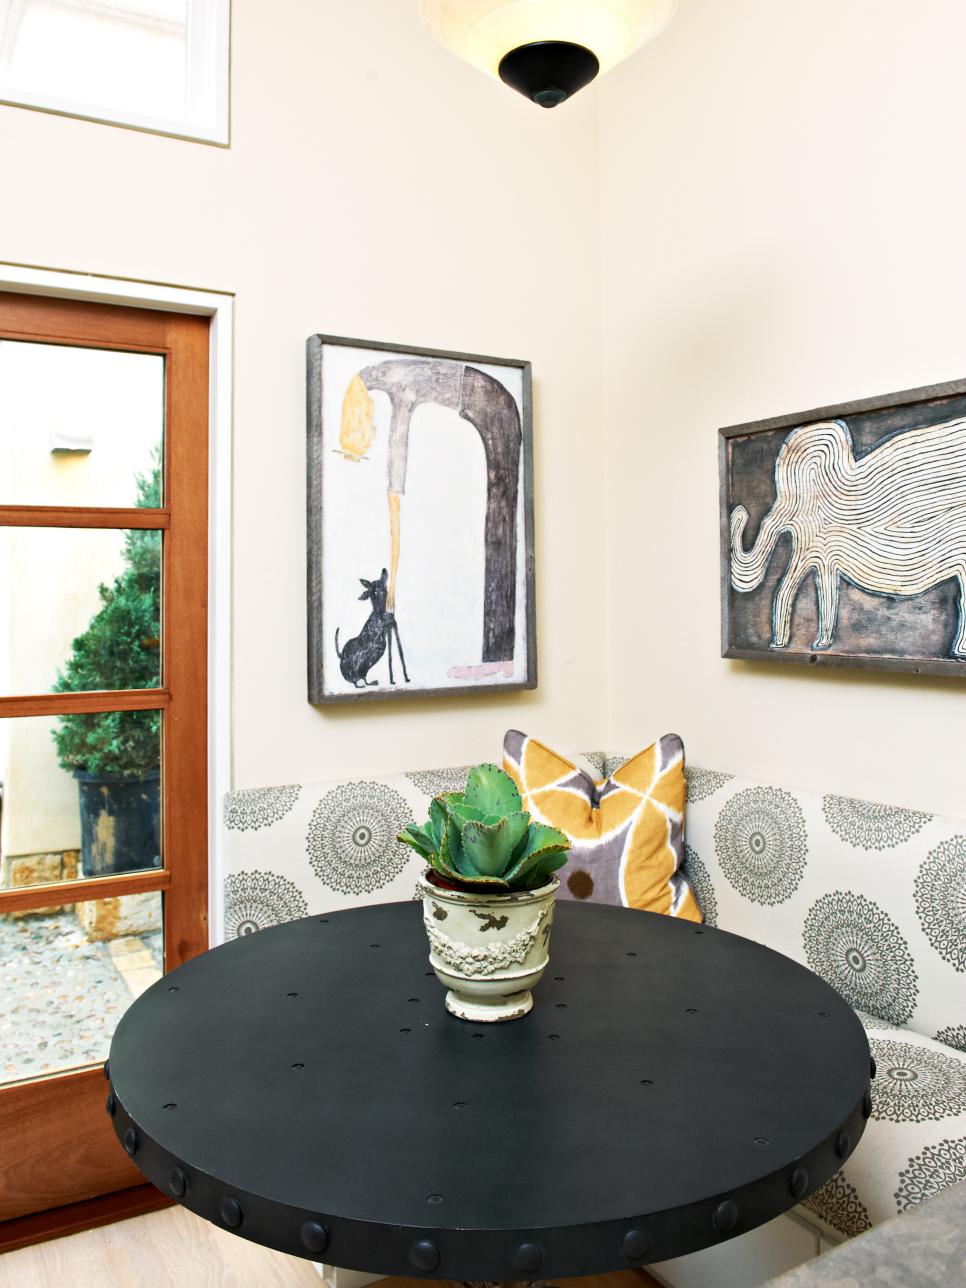 Breakfast Nook With Upholstered Banquette and Eclectic Art